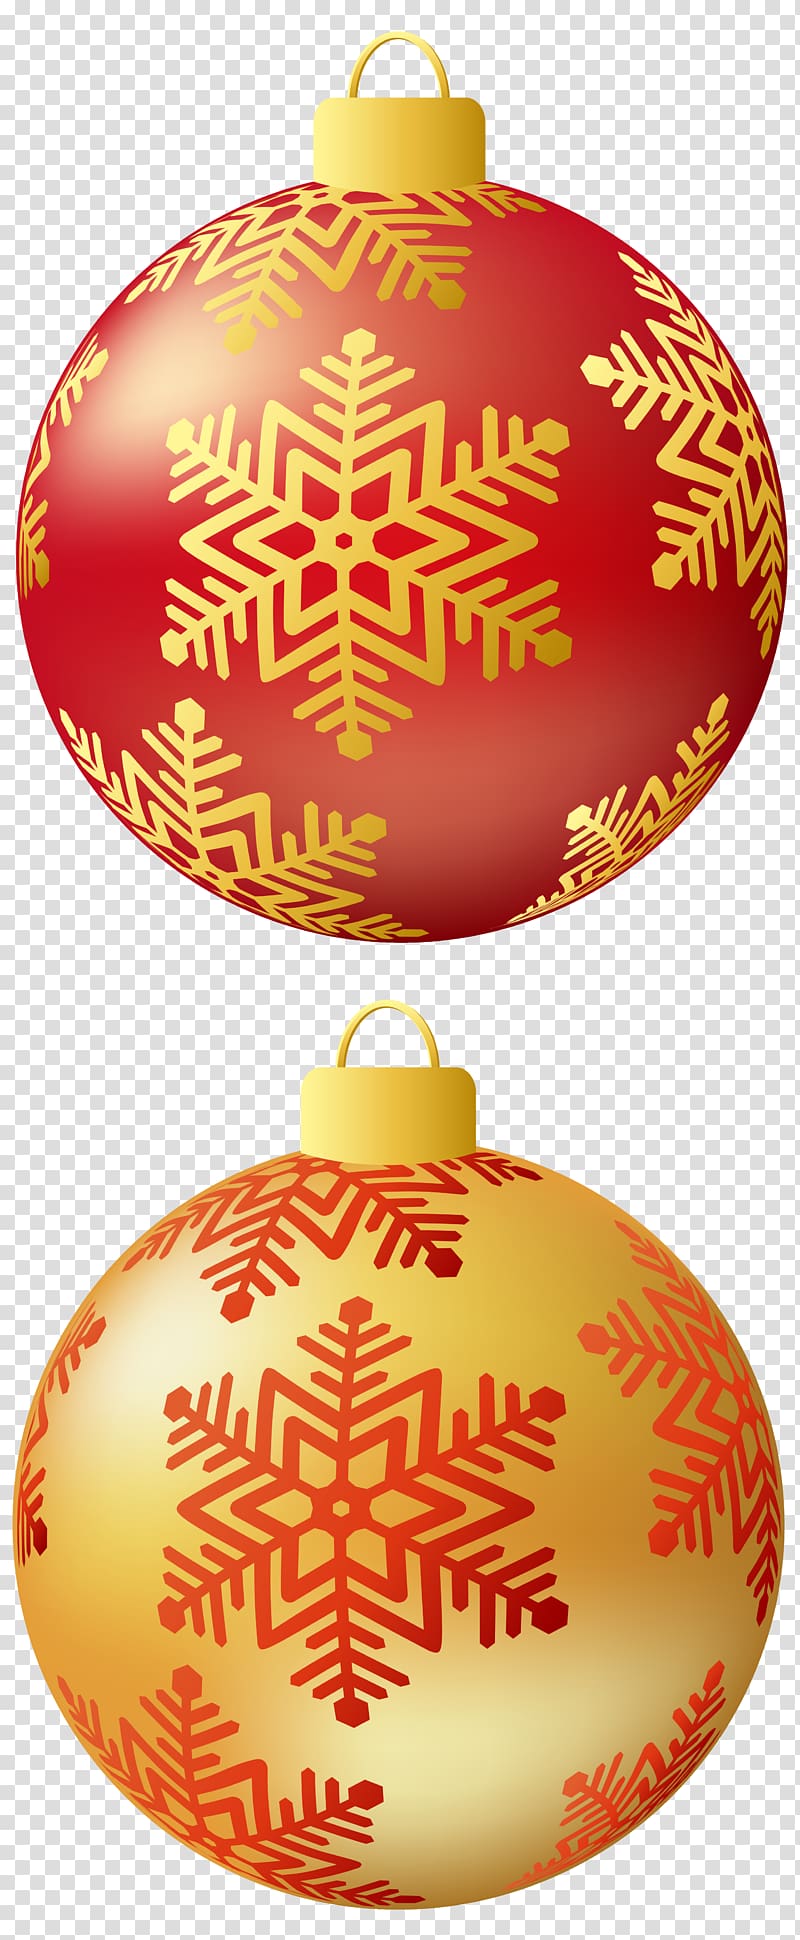 red and yellow Christmass bauble illustration, Christmas , Christmas Balls Set transparent background PNG clipart